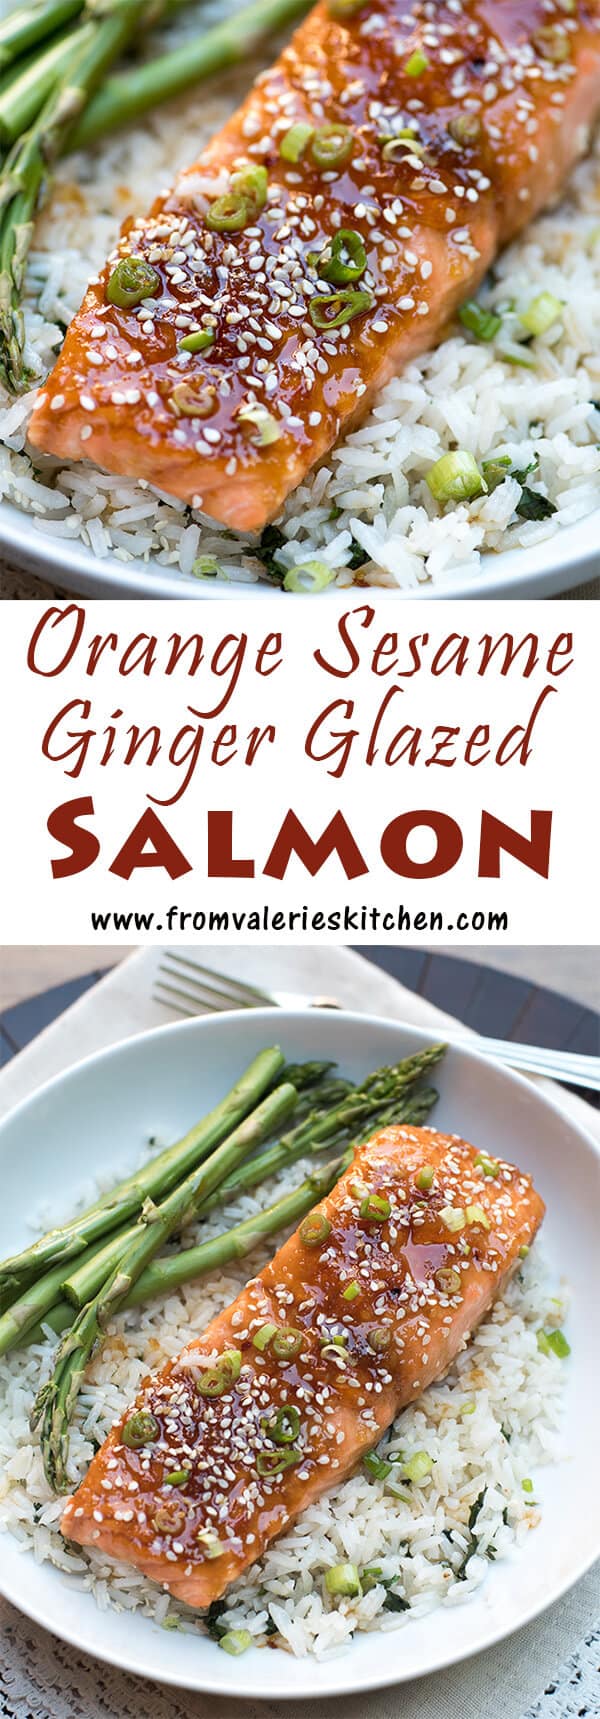 A slightly sweet and super flavorful glaze creates this irresistible Orange Sesame Ginger Glazed Salmon. Super simple to prepare, ready in under 30 minutes!